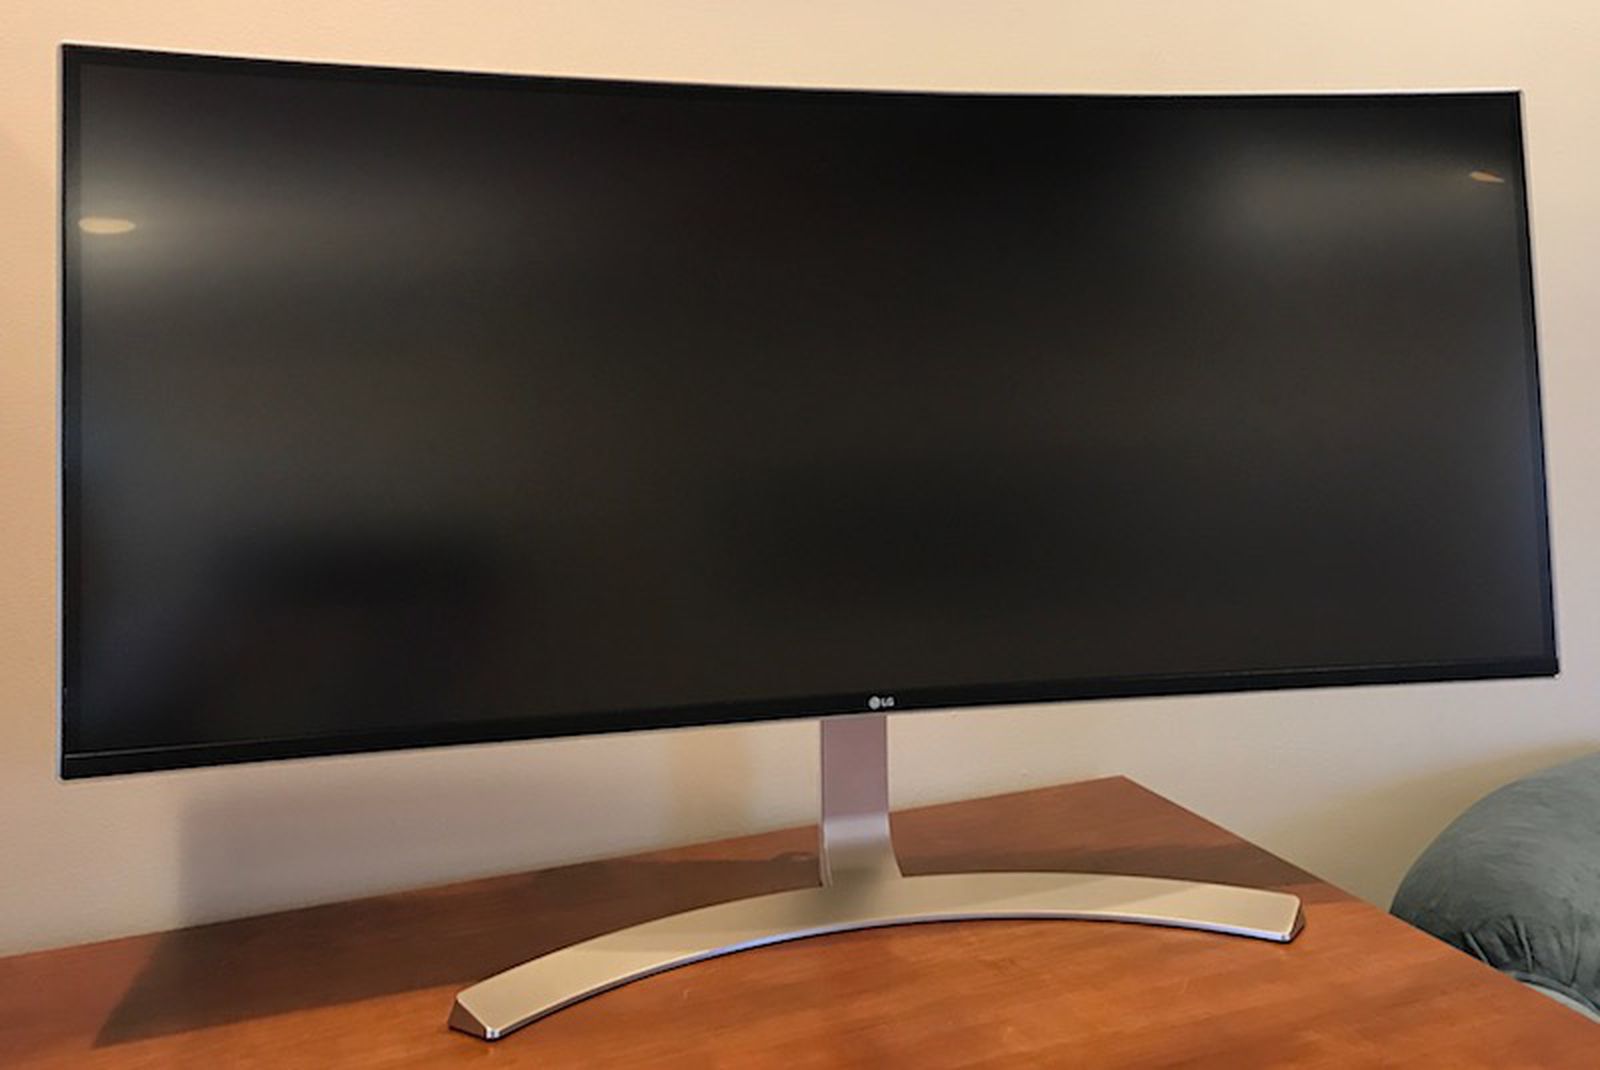 Fjernelse Abe rense Review: LG's $1500 38UC99 UltraWide Display Offers a Giant, Desk-Filling  Workspace - MacRumors